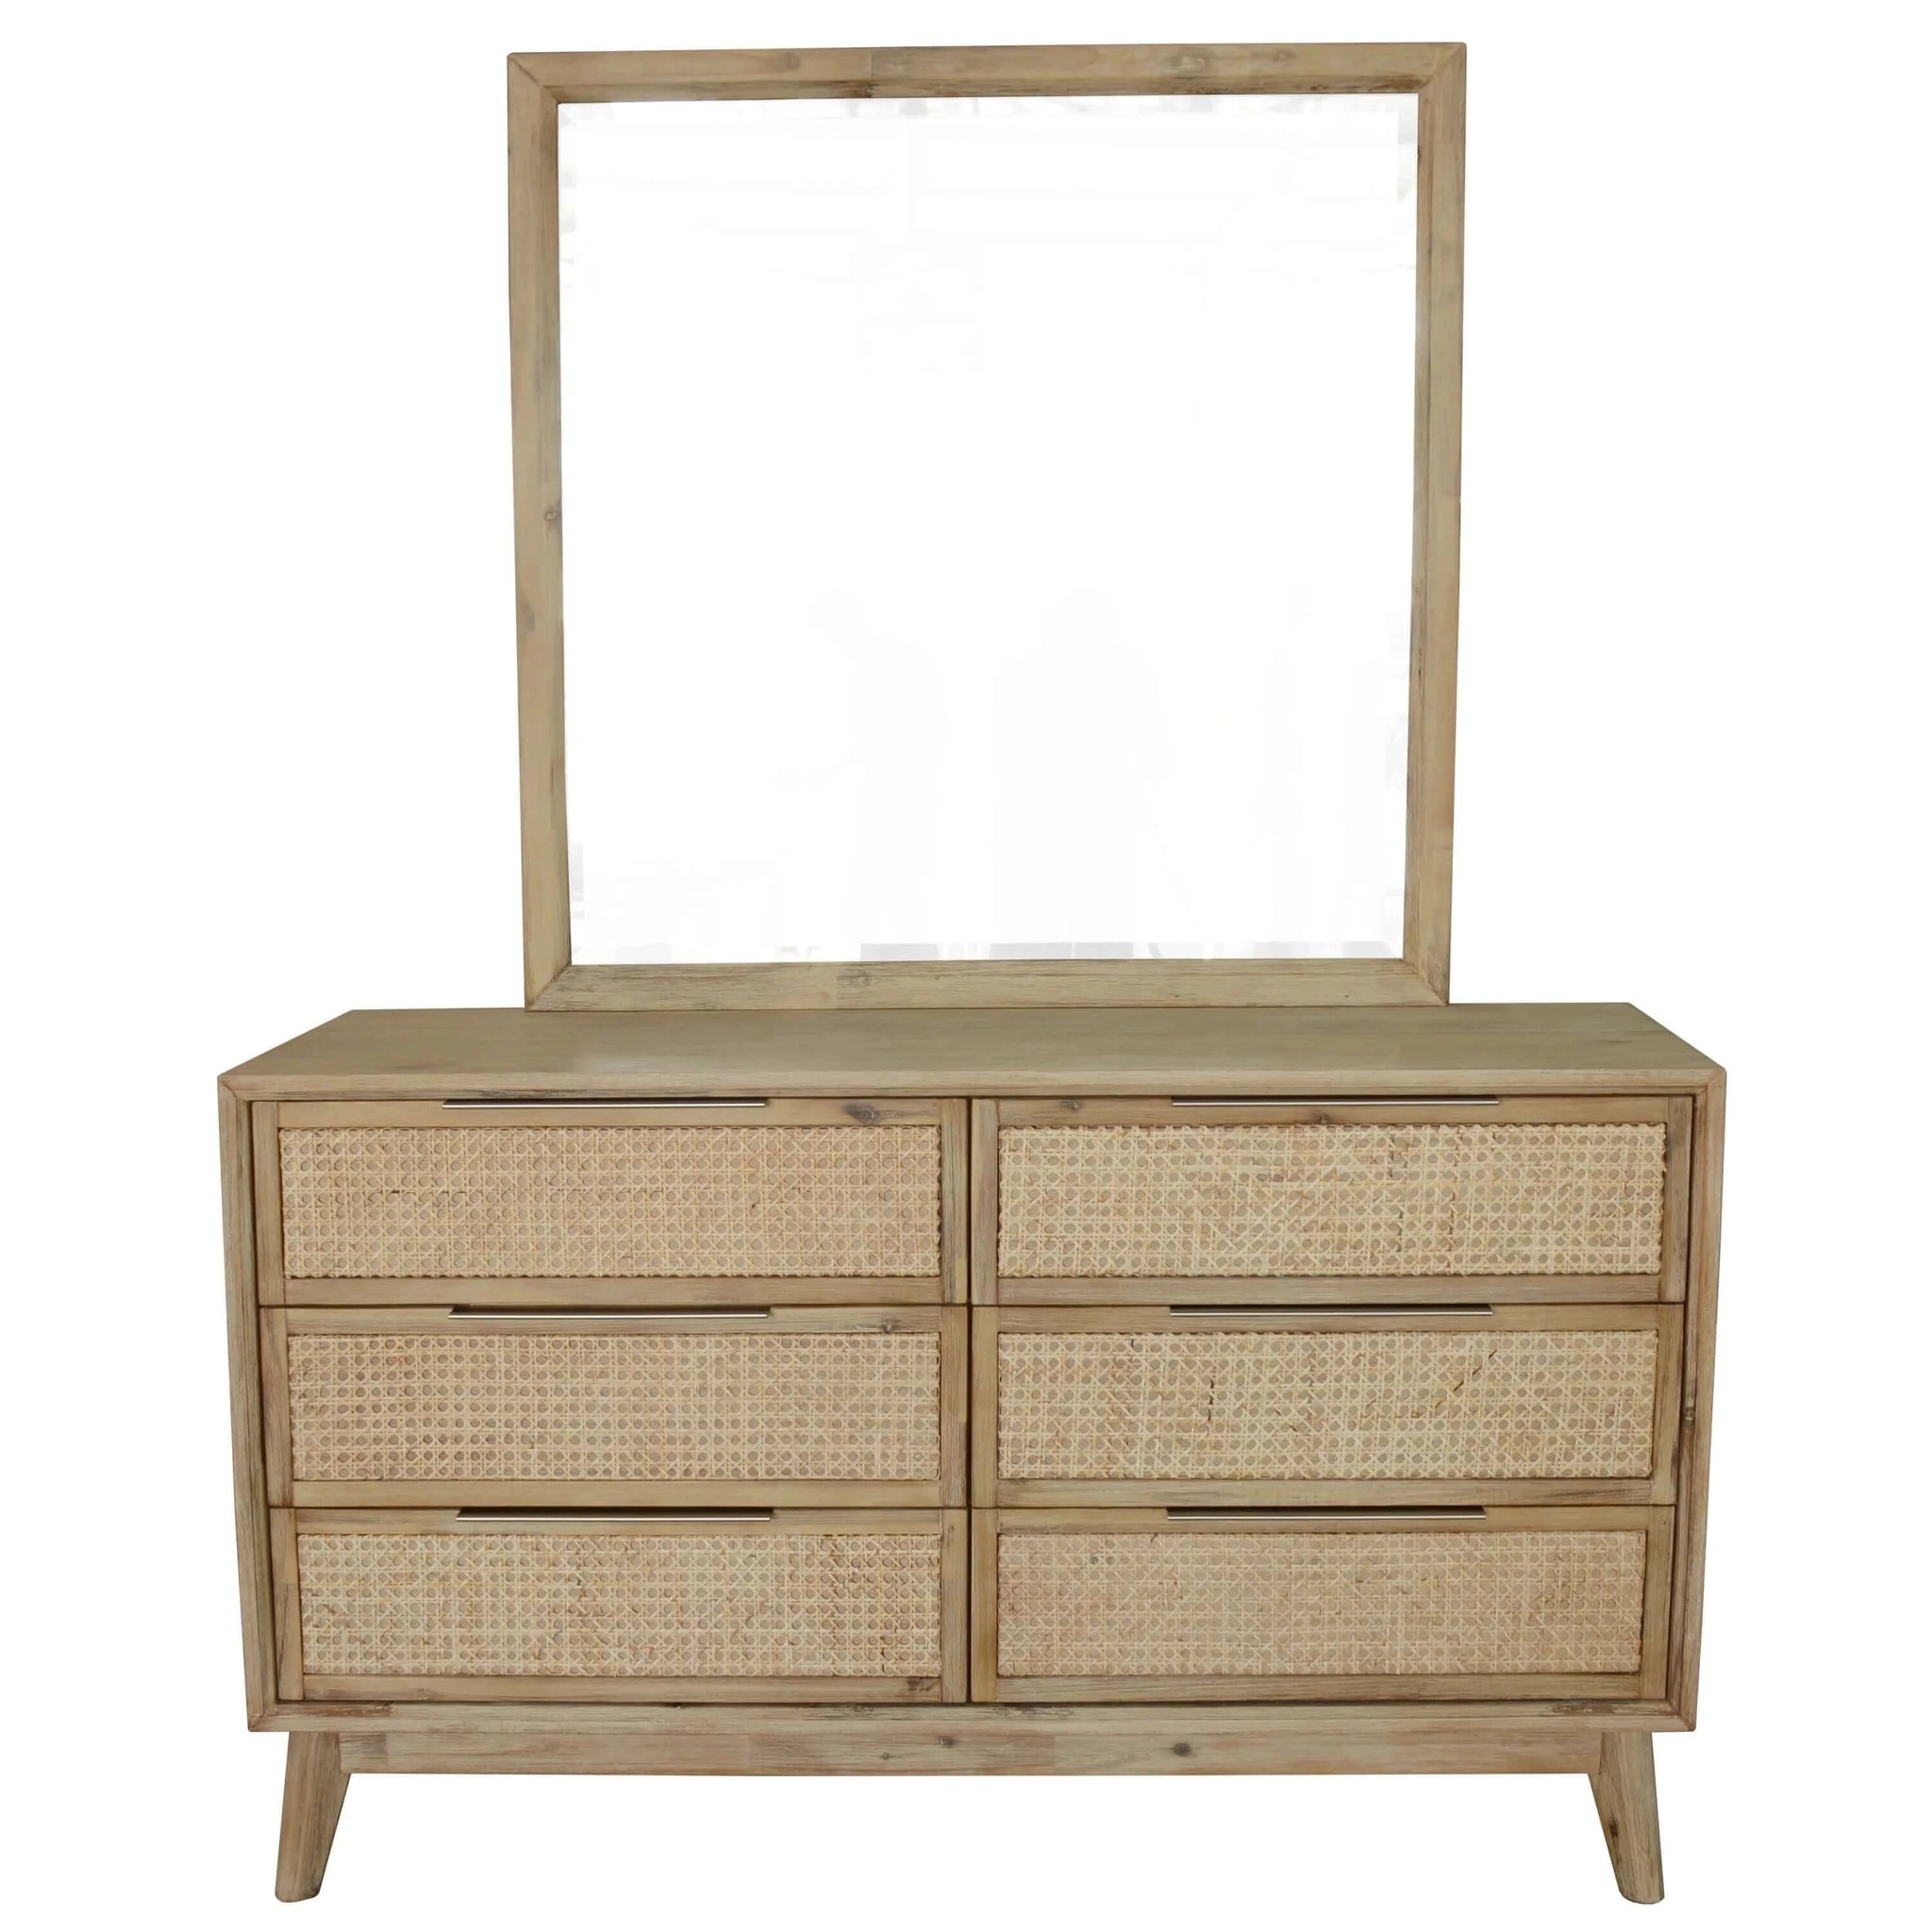 Grevillea Dresser 6 Chest of Drawers Acacia Wood Storage Cabinet Rattan - Brown-Upinteriors